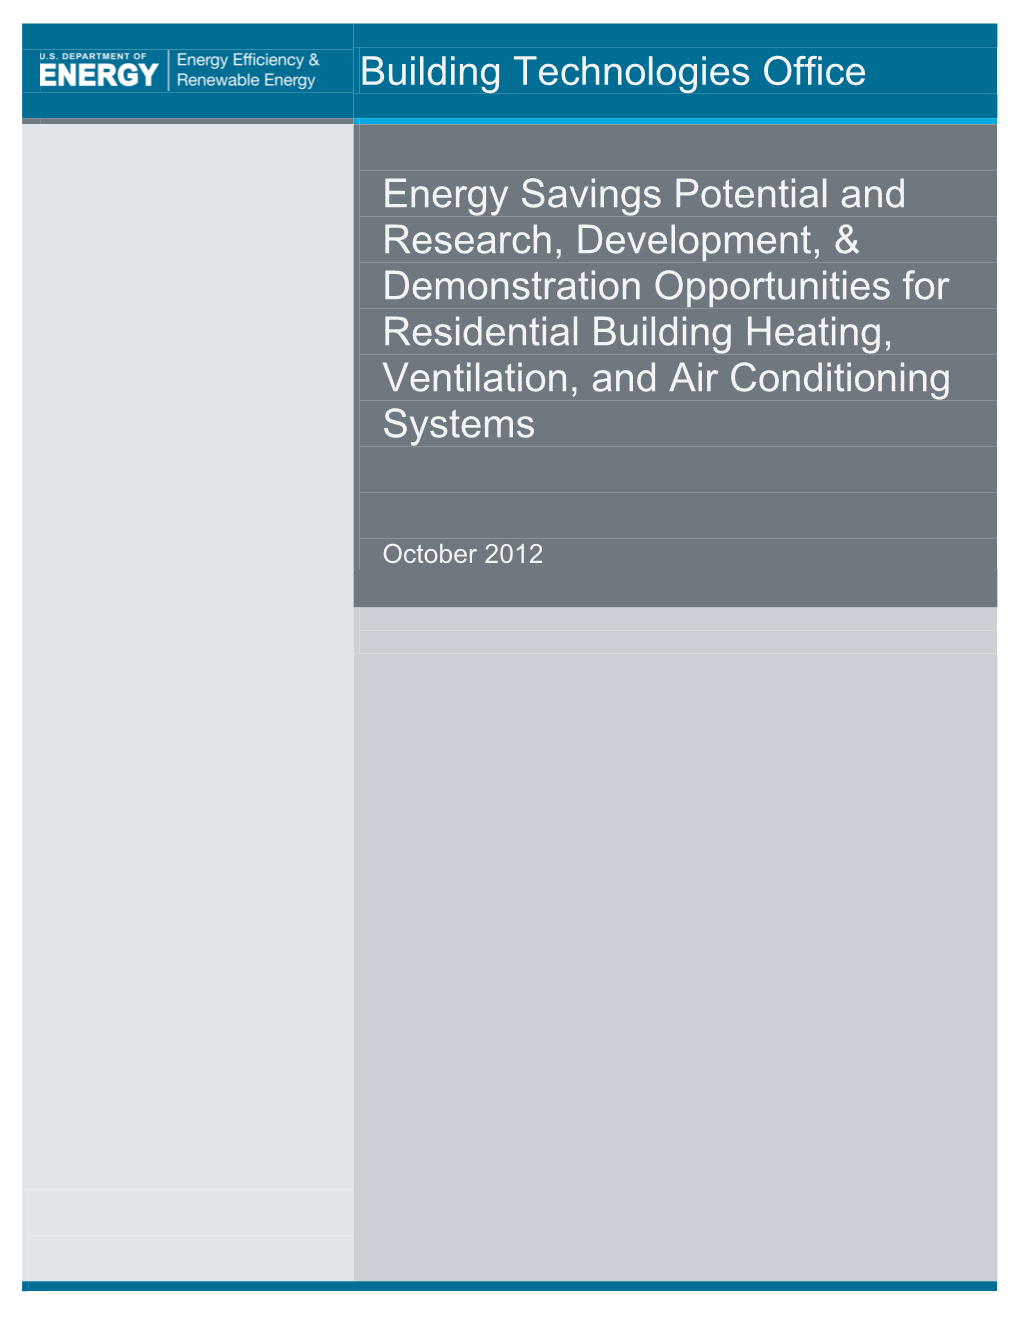 Energy Savings Potential and RD&D Opportunities for Residential